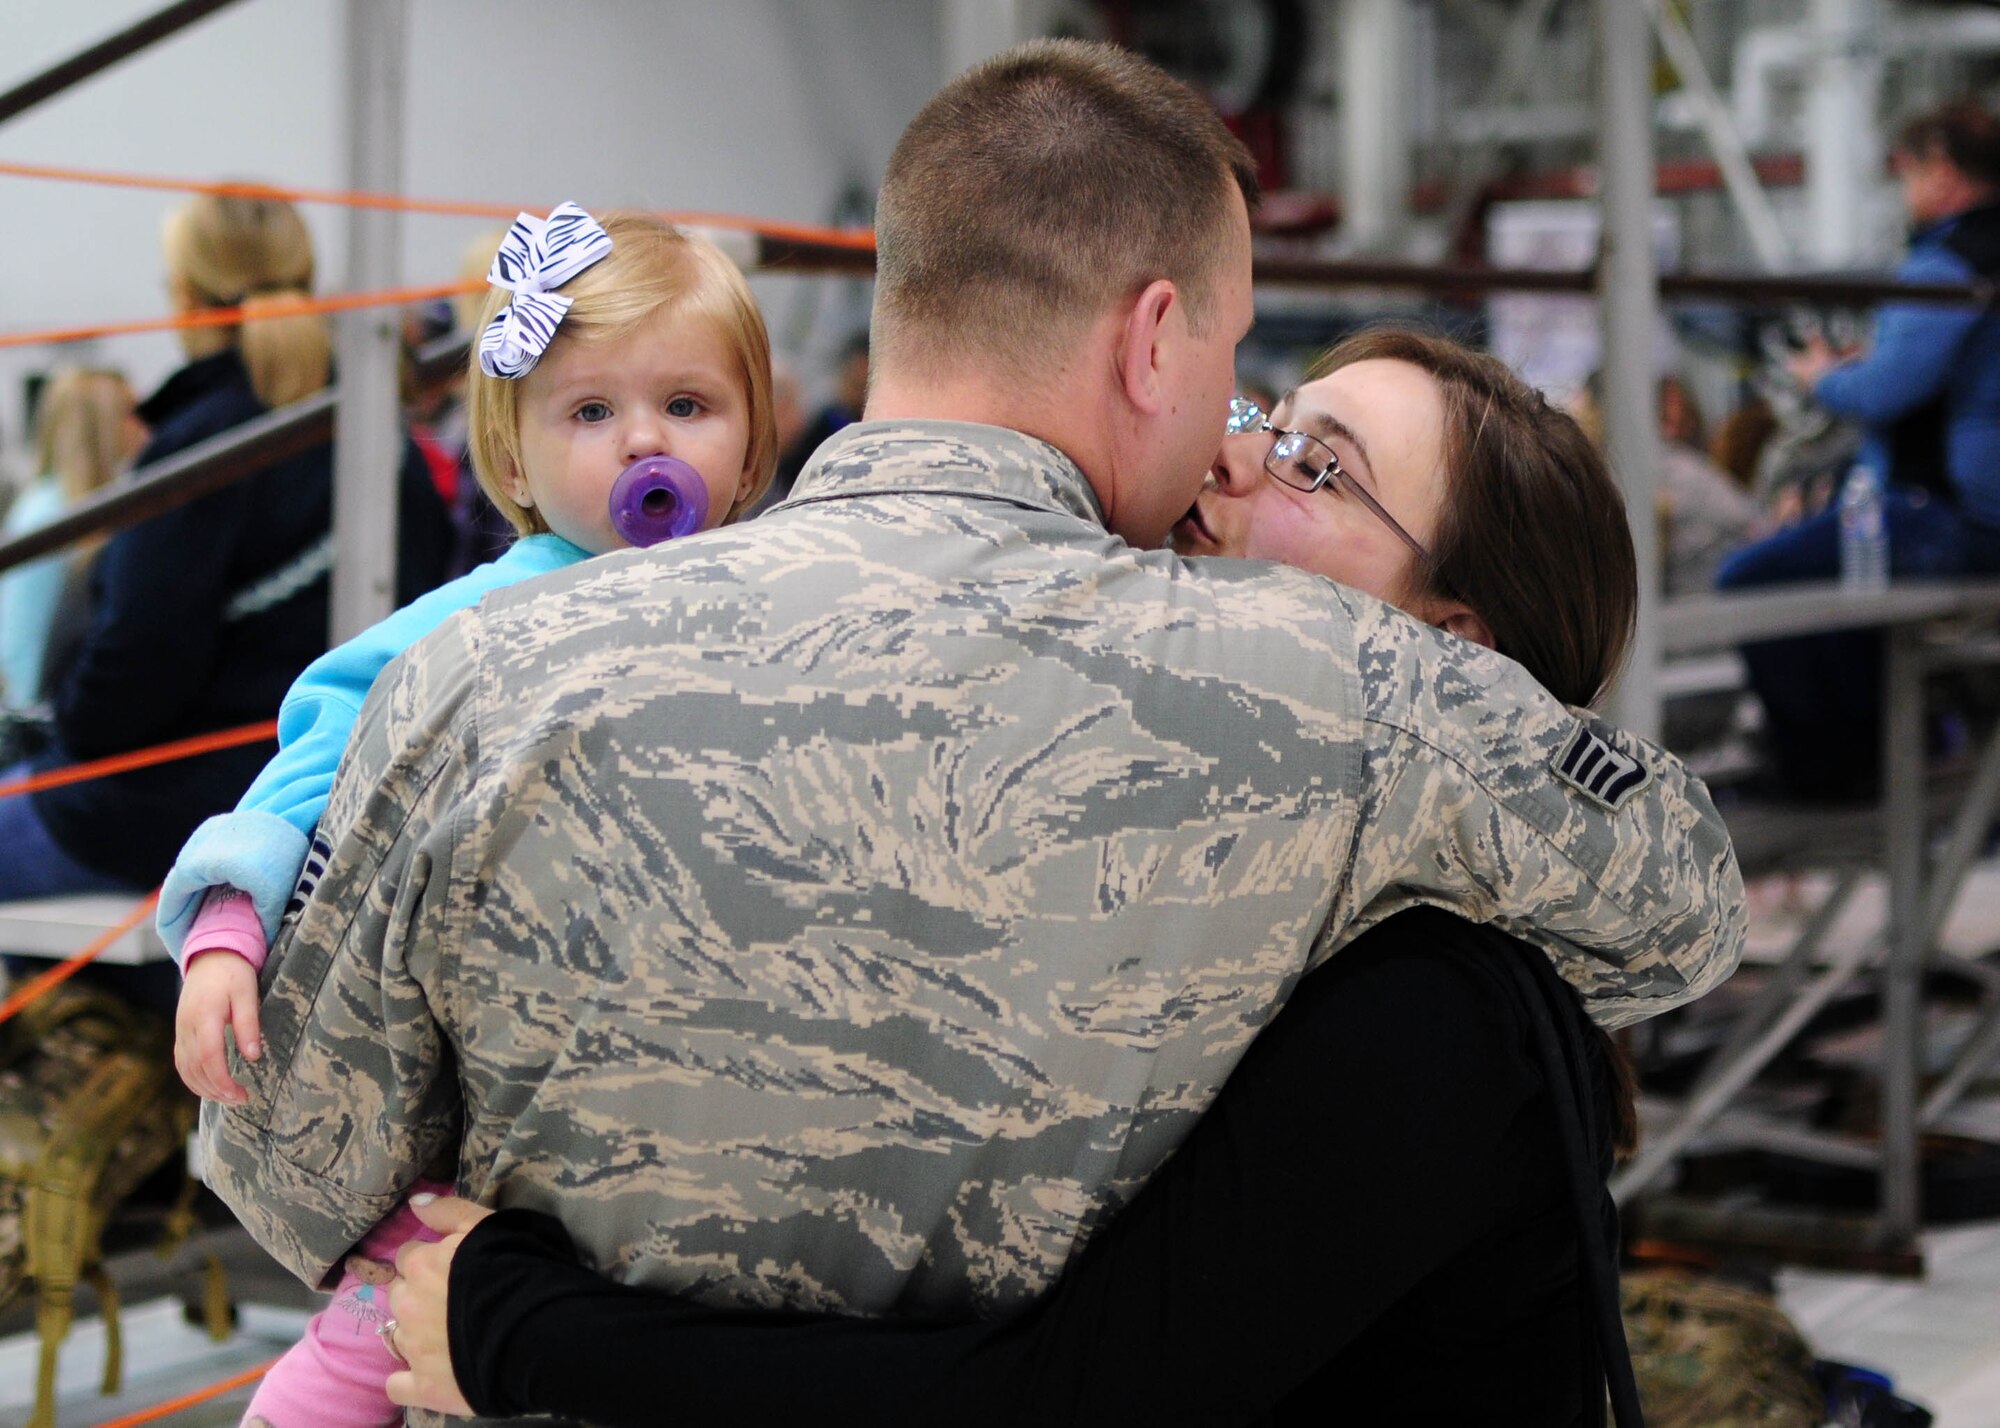 Family members share an embrace at Niagara Falls Air Reserve Station prior to deployment on May 7, 2016. The deployment will take these Airmen to Quatar in support of Operation Inherent Resolve. (U.S. Air Force photo by Staff Sgt. Richard D. Mekkri/released)